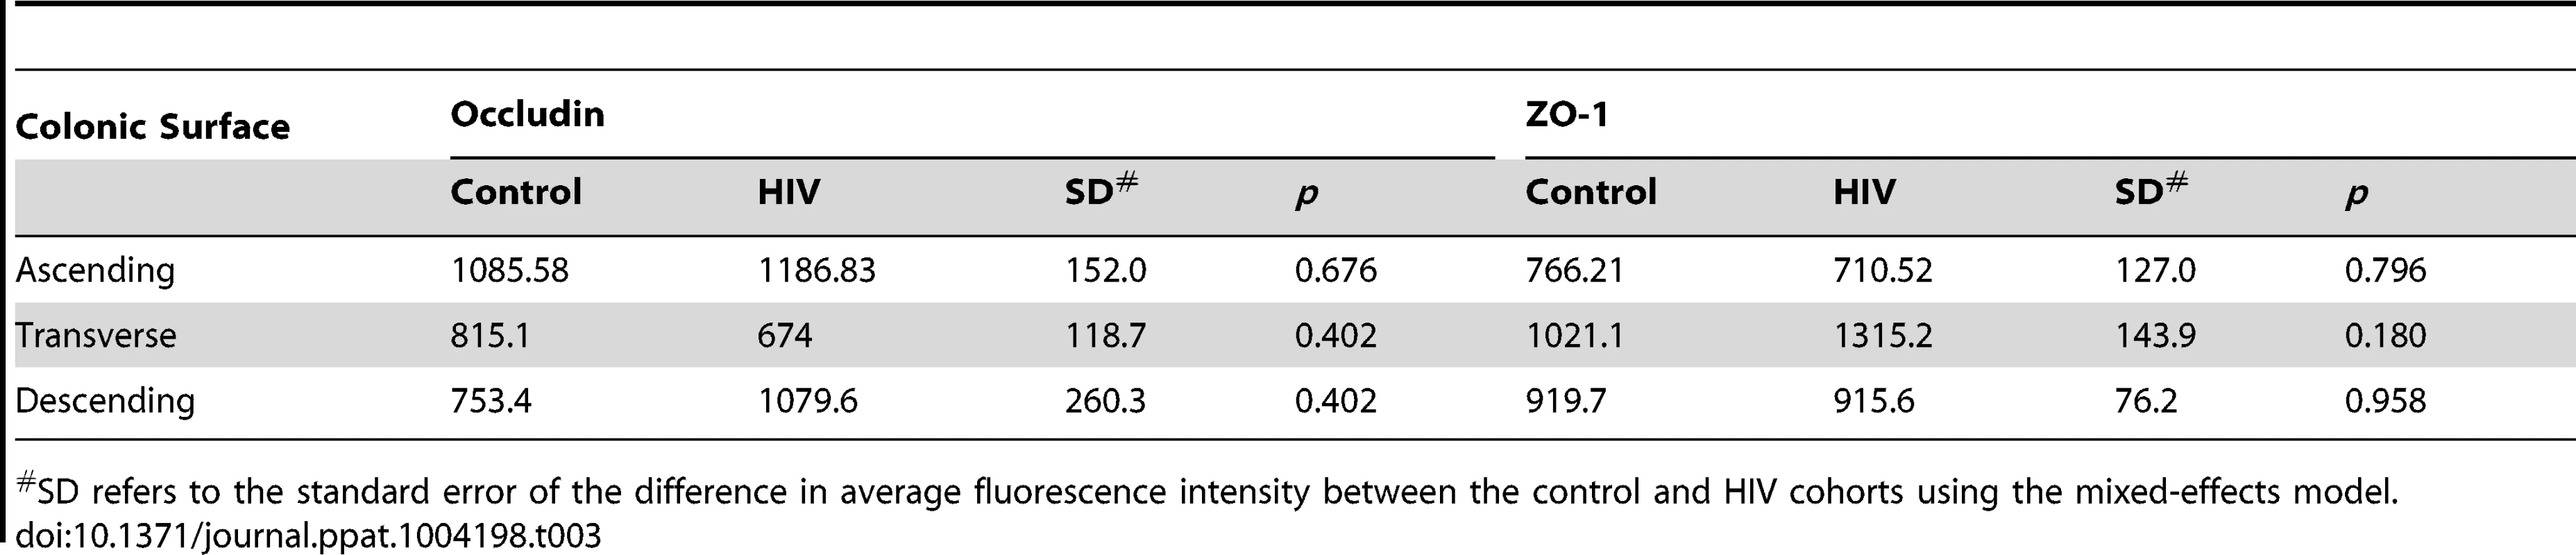 Average fluorescence intensity for occludin and ZO-1 staining of colonic surface epithelium sections.